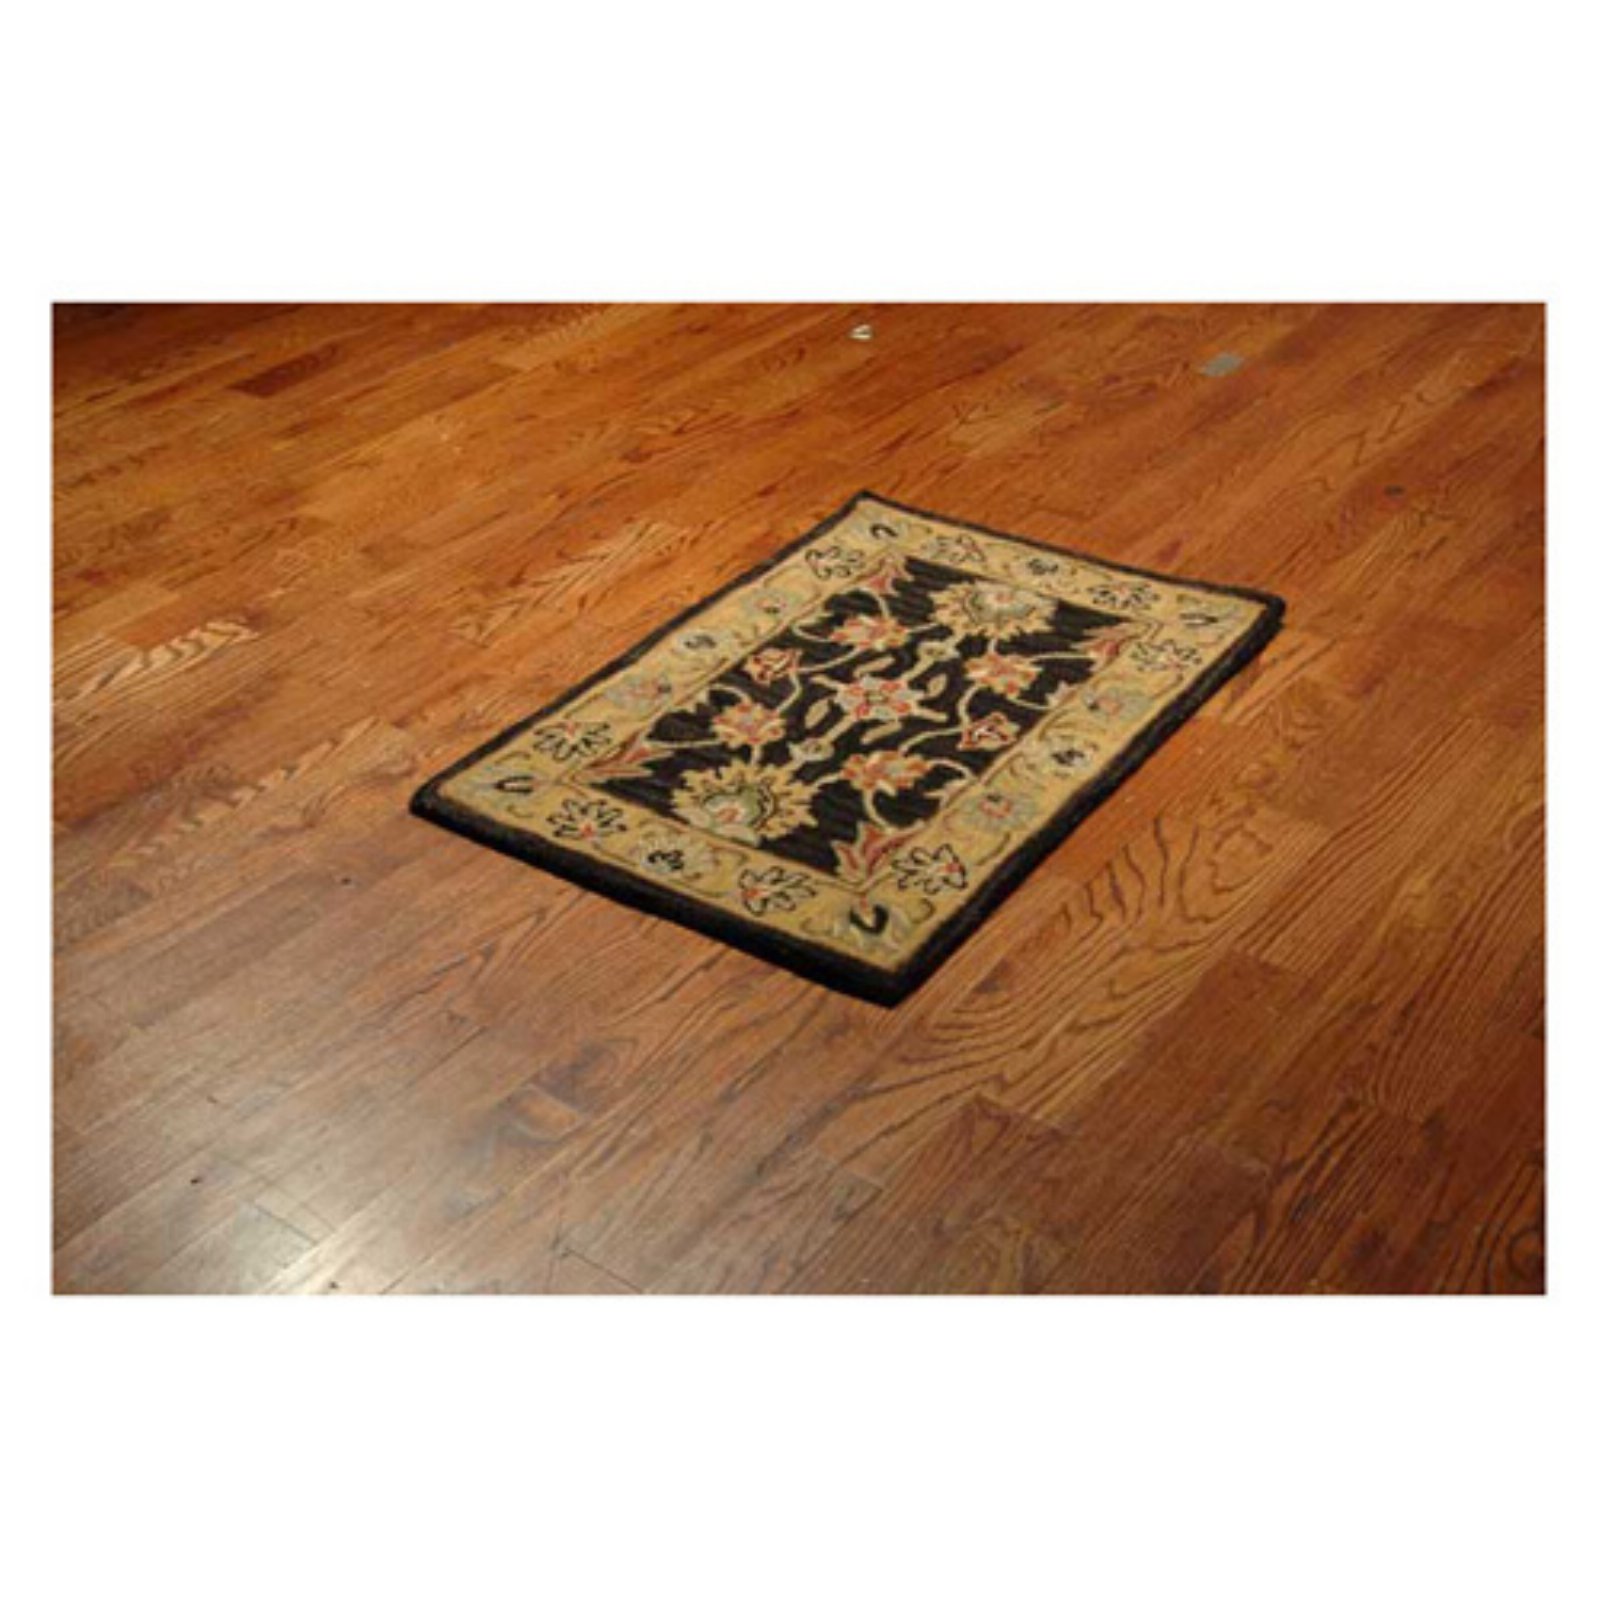 SAFAVIEH Heritage Regis Traditional Wool Area Rug, Charcoal/Gold, 2'3" x 4' - image 3 of 10